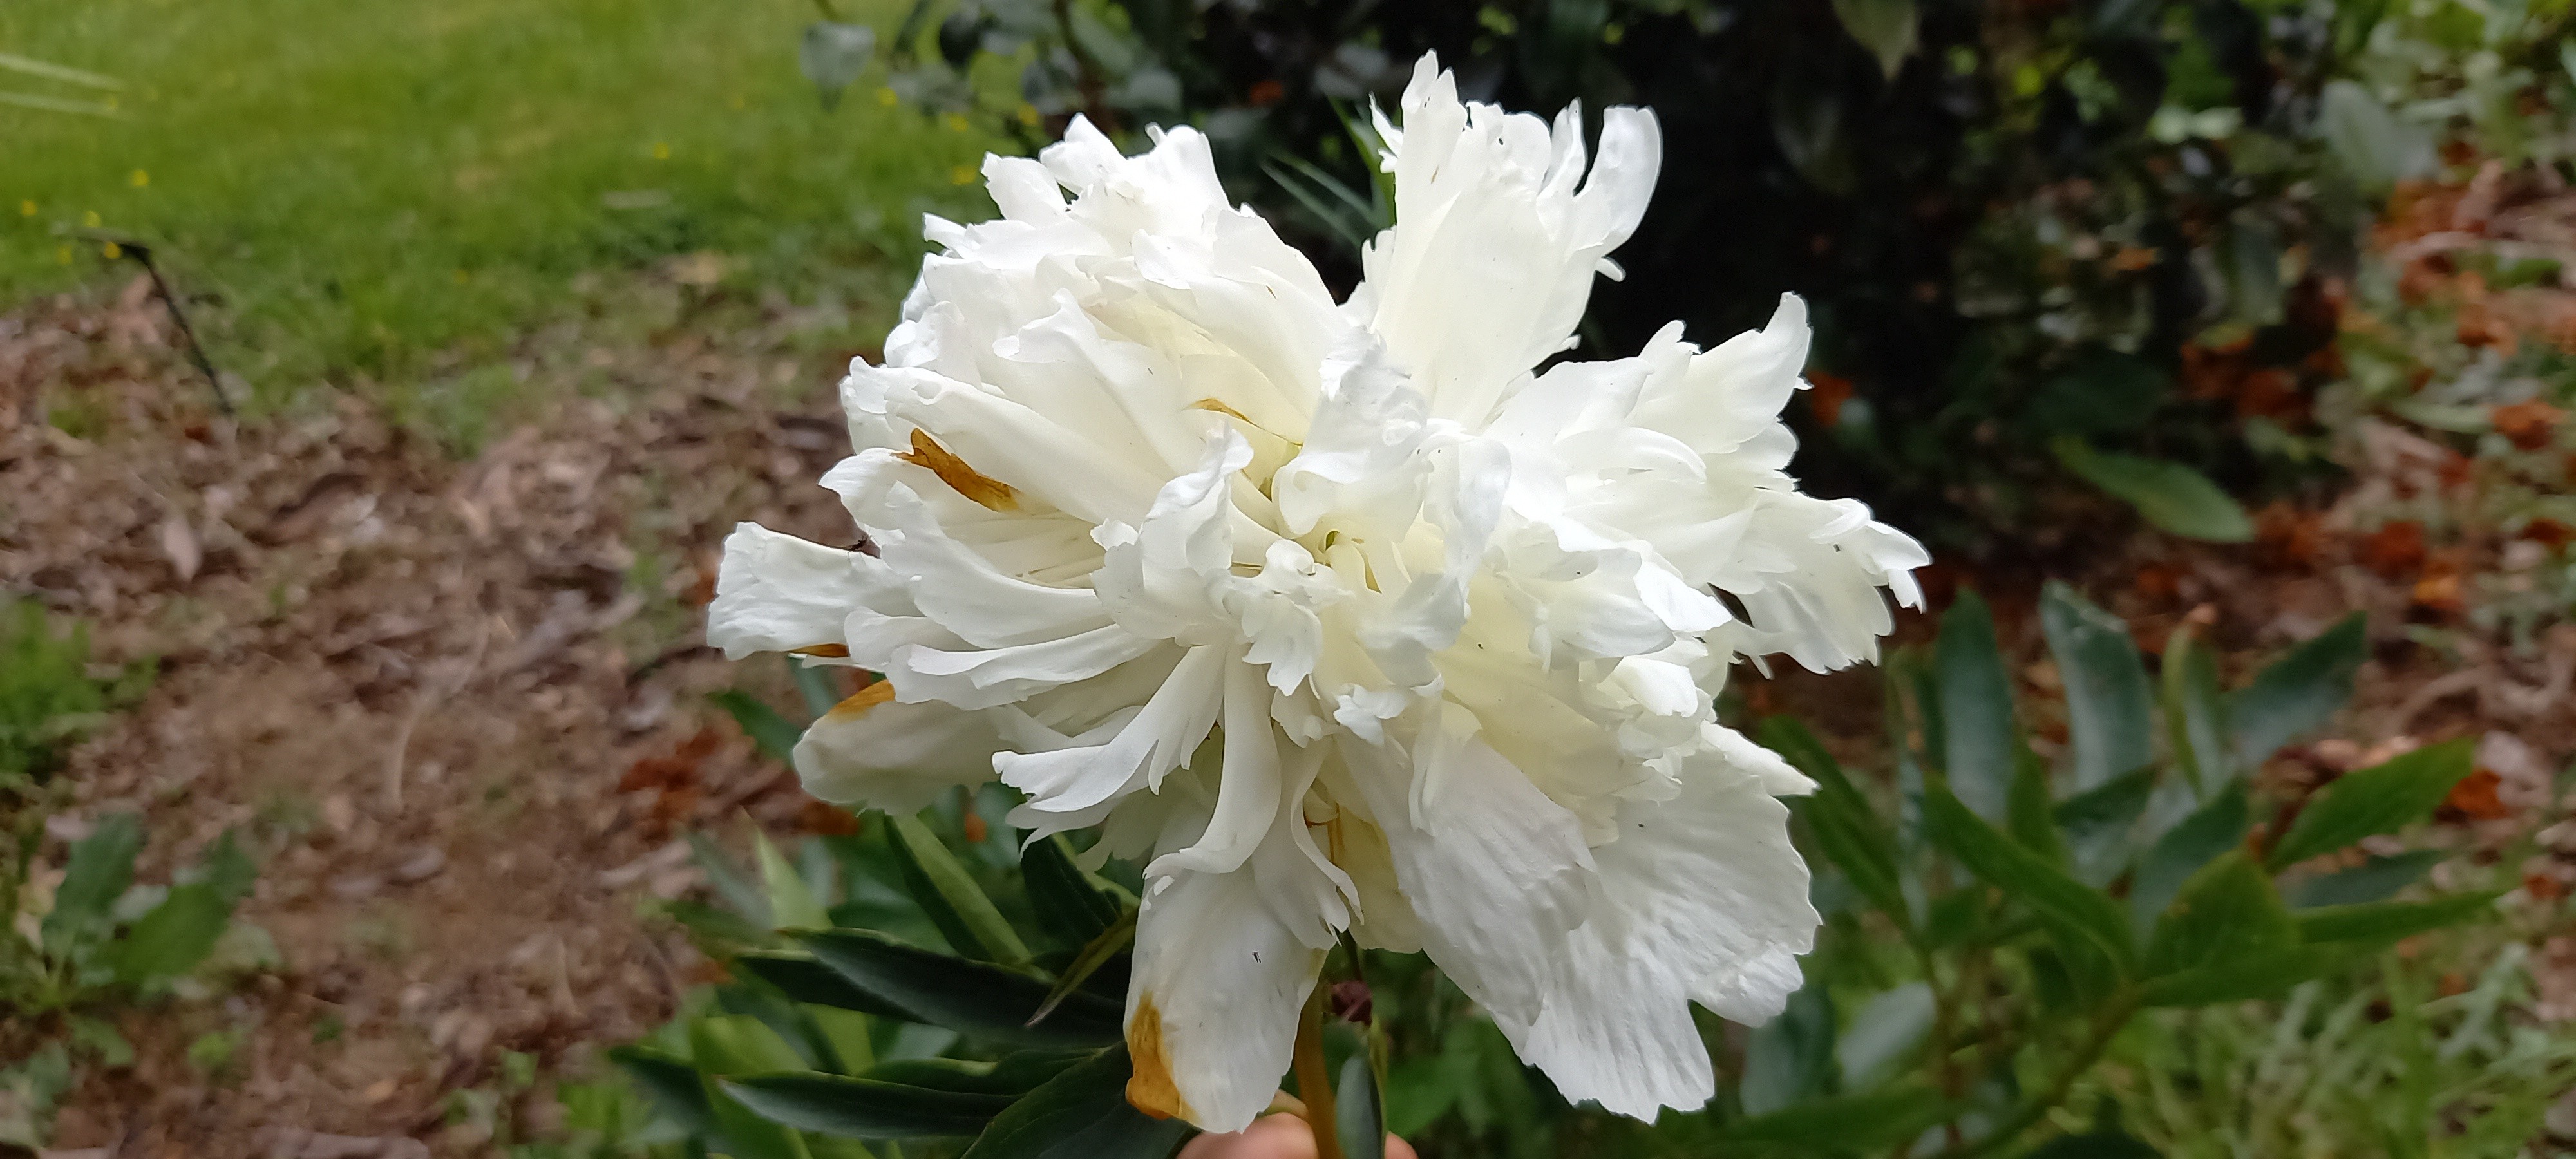 Paeonia lactiflora 'Couronne d'or'